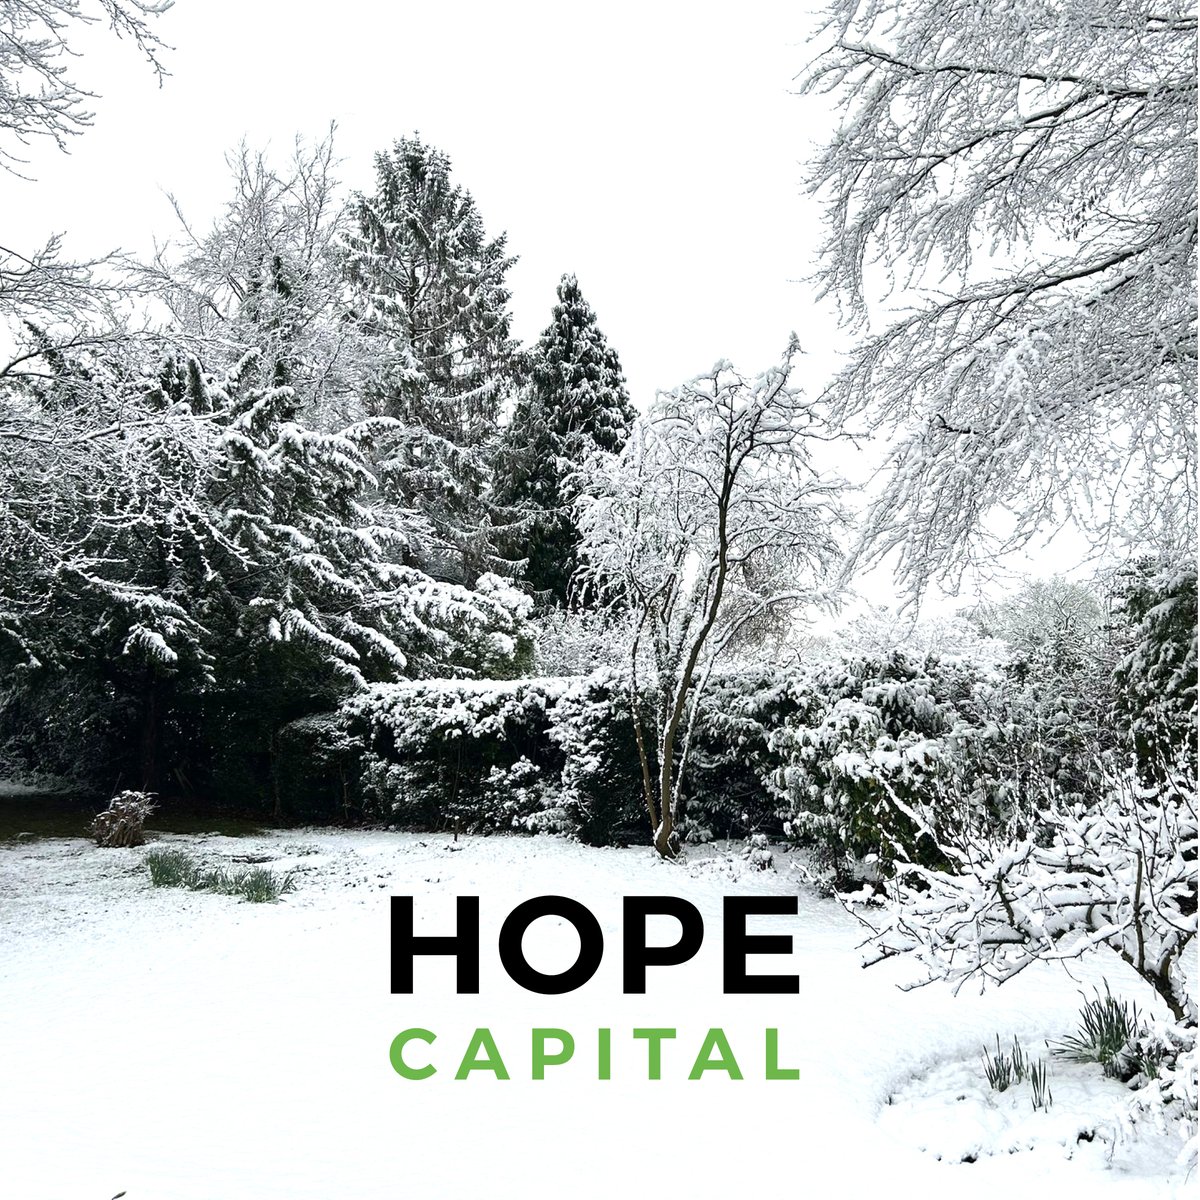 ❄Today, we're officially called ‘Snow’ Capital! We may be snowed in, but that doesn’t mean we’ll be ‘freezing’ the calls.

Scotland, Central & North - Sam📞07774 809 330
Wales & South West - David📞07387 865 330
London & South - Charlie📞 07881 402 894

#brokers #bridgingloans